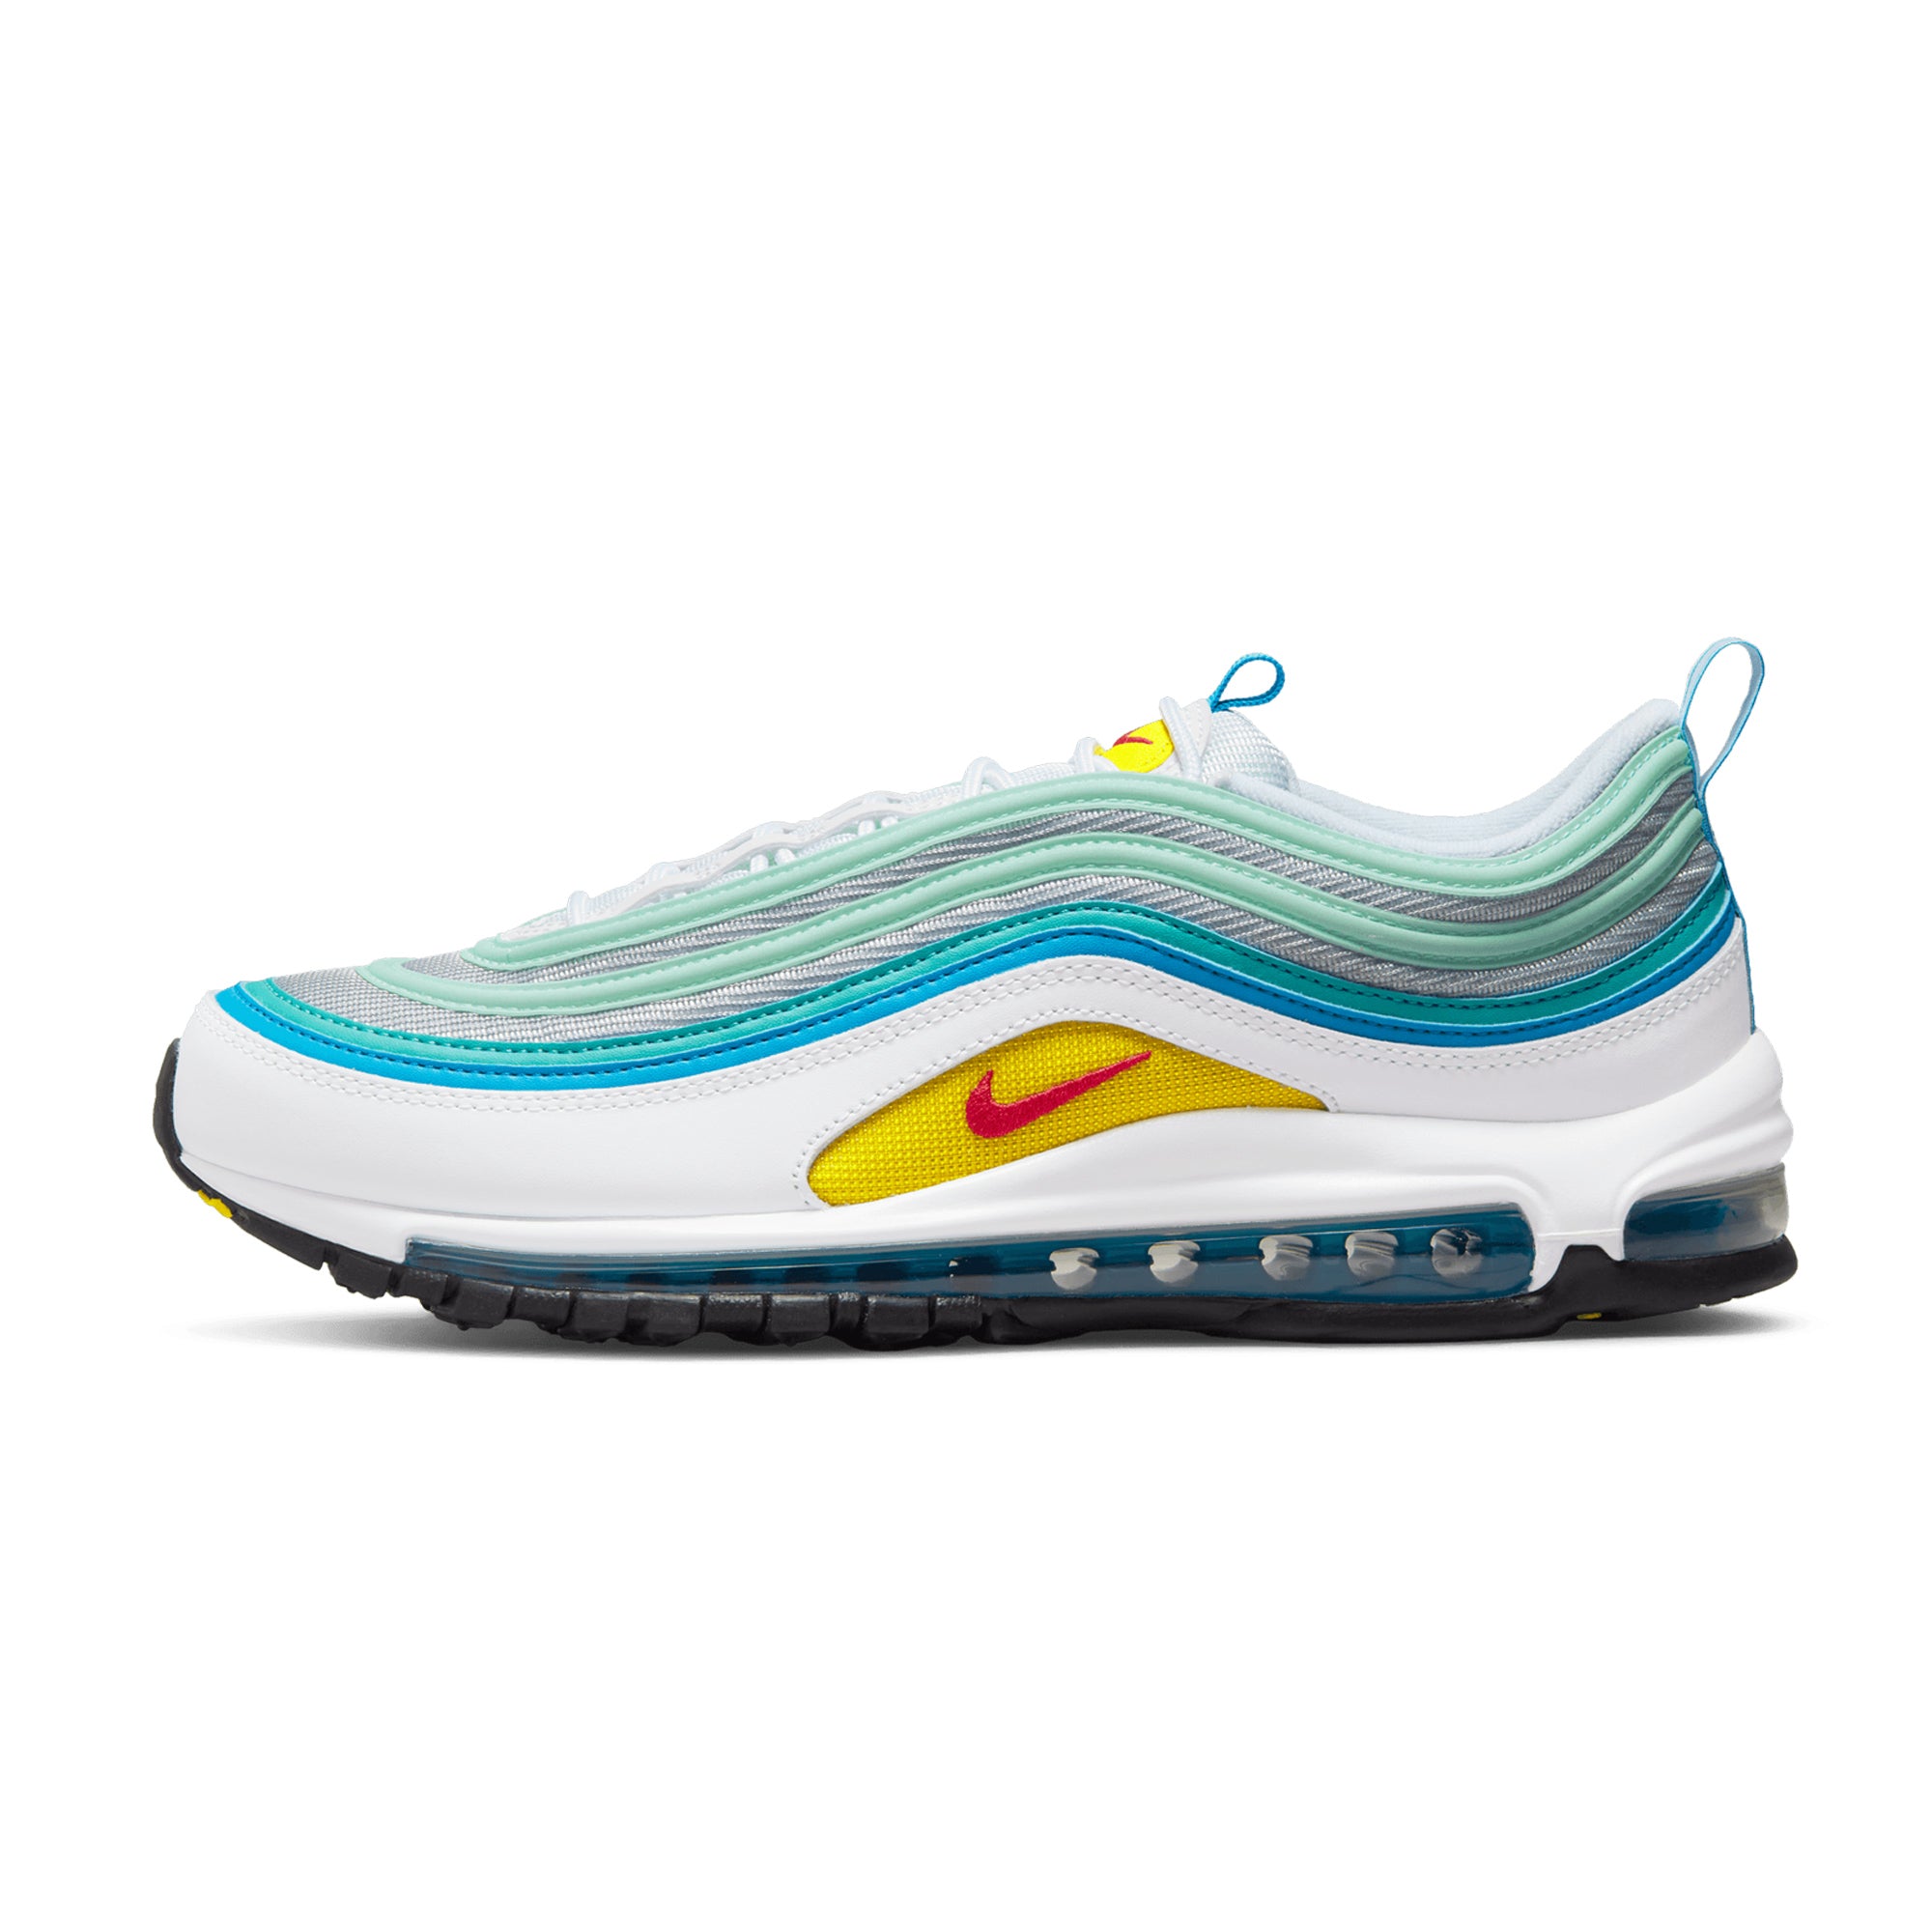 teal and white air max 97